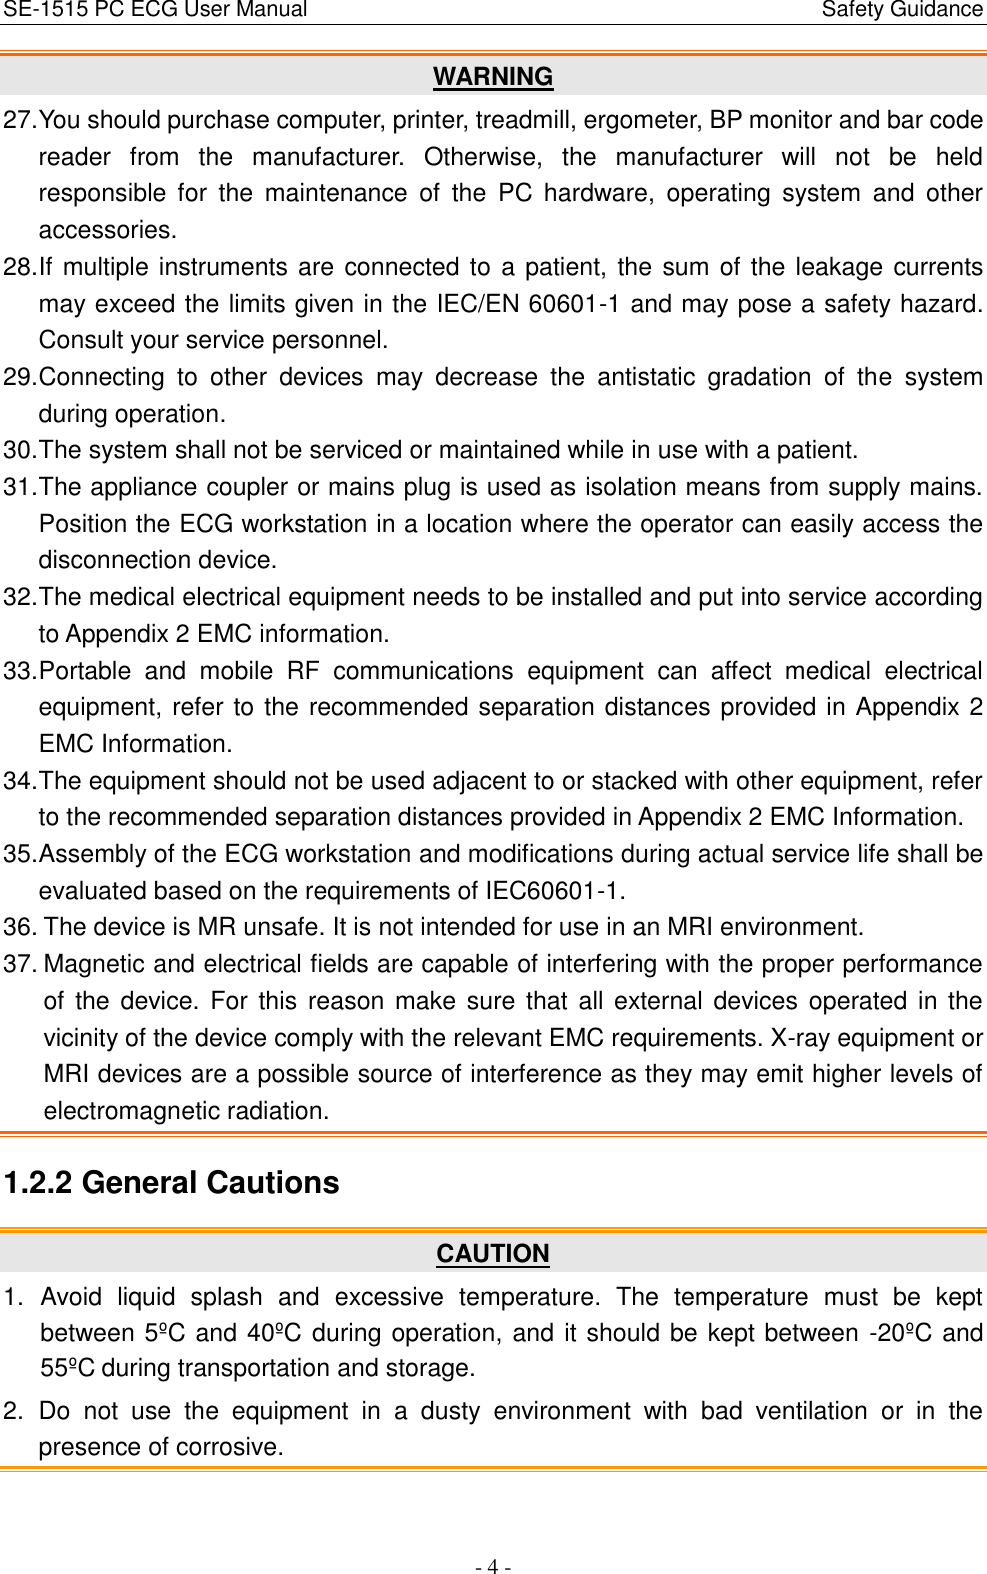 SE-1515 PC ECG User Manual                                                                                            Safety Guidance - 4 - WARNING 27. You should purchase computer, printer, treadmill, ergometer, BP monitor and bar code reader  from  the  manufacturer.  Otherwise,  the  manufacturer  will  not  be  held responsible  for  the  maintenance  of  the  PC  hardware,  operating  system  and  other accessories. 28. If multiple instruments are connected to a patient, the sum of the leakage currents may exceed the limits given in the IEC/EN 60601-1 and may pose a safety hazard. Consult your service personnel. 29. Connecting  to  other  devices  may  decrease  the  antistatic  gradation  of  the  system during operation. 30. The system shall not be serviced or maintained while in use with a patient. 31. The appliance coupler or mains plug is used as isolation means from supply mains. Position the ECG workstation in a location where the operator can easily access the disconnection device. 32. The medical electrical equipment needs to be installed and put into service according to Appendix 2 EMC information. 33. Portable  and  mobile  RF  communications  equipment  can  affect  medical  electrical equipment, refer to the recommended separation distances provided in Appendix 2 EMC Information. 34. The equipment should not be used adjacent to or stacked with other equipment, refer to the recommended separation distances provided in Appendix 2 EMC Information. 35. Assembly of the ECG workstation and modifications during actual service life shall be evaluated based on the requirements of IEC60601-1. 36. The device is MR unsafe. It is not intended for use in an MRI environment. 37. Magnetic and electrical fields are capable of interfering with the proper performance of  the device. For this  reason make sure that  all external devices operated in the vicinity of the device comply with the relevant EMC requirements. X-ray equipment or MRI devices are a possible source of interference as they may emit higher levels of electromagnetic radiation. 1.2.2 General Cautions   CAUTION 1.  Avoid  liquid  splash  and  excessive  temperature.  The  temperature  must  be  kept between 5ºC and 40ºC during operation, and it should be kept between -20ºC and 55ºC  during transportation and storage. 2.  Do  not  use  the  equipment  in  a  dusty  environment  with  bad  ventilation  or  in  the presence of corrosive. 